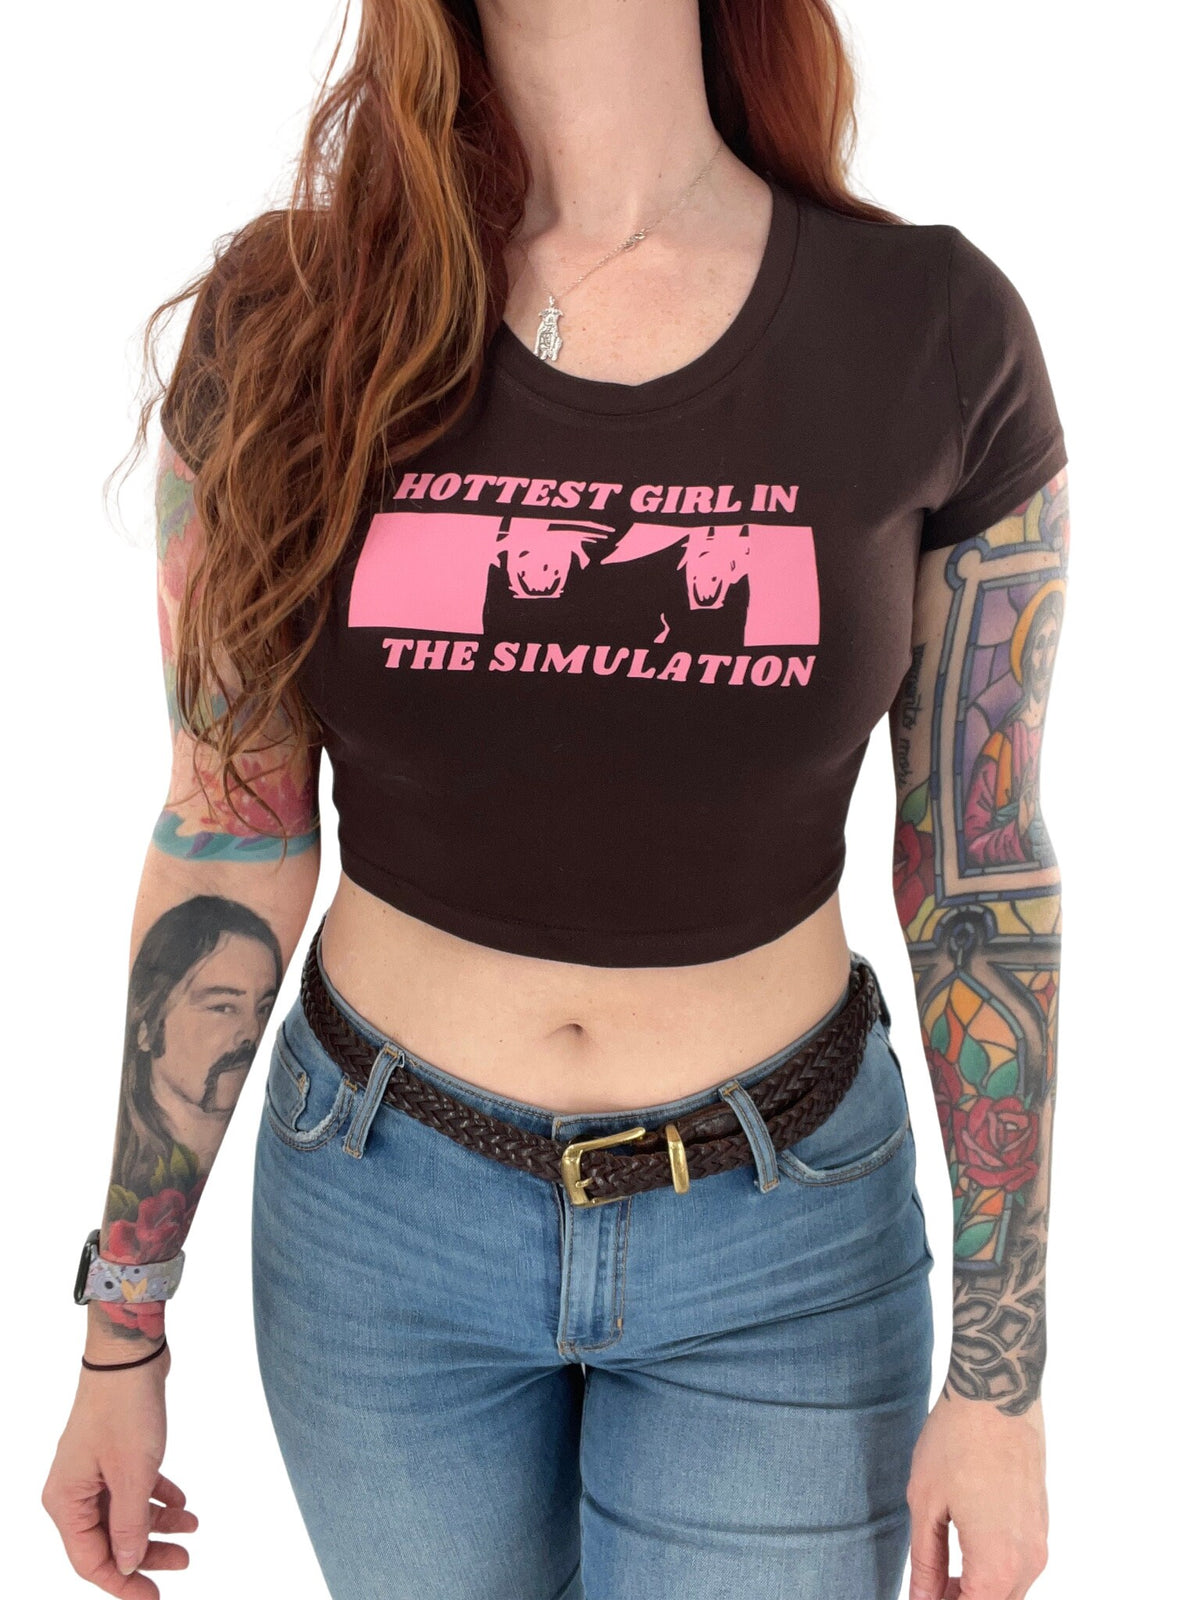 Hottest Girl in the Simulation Baby Tee